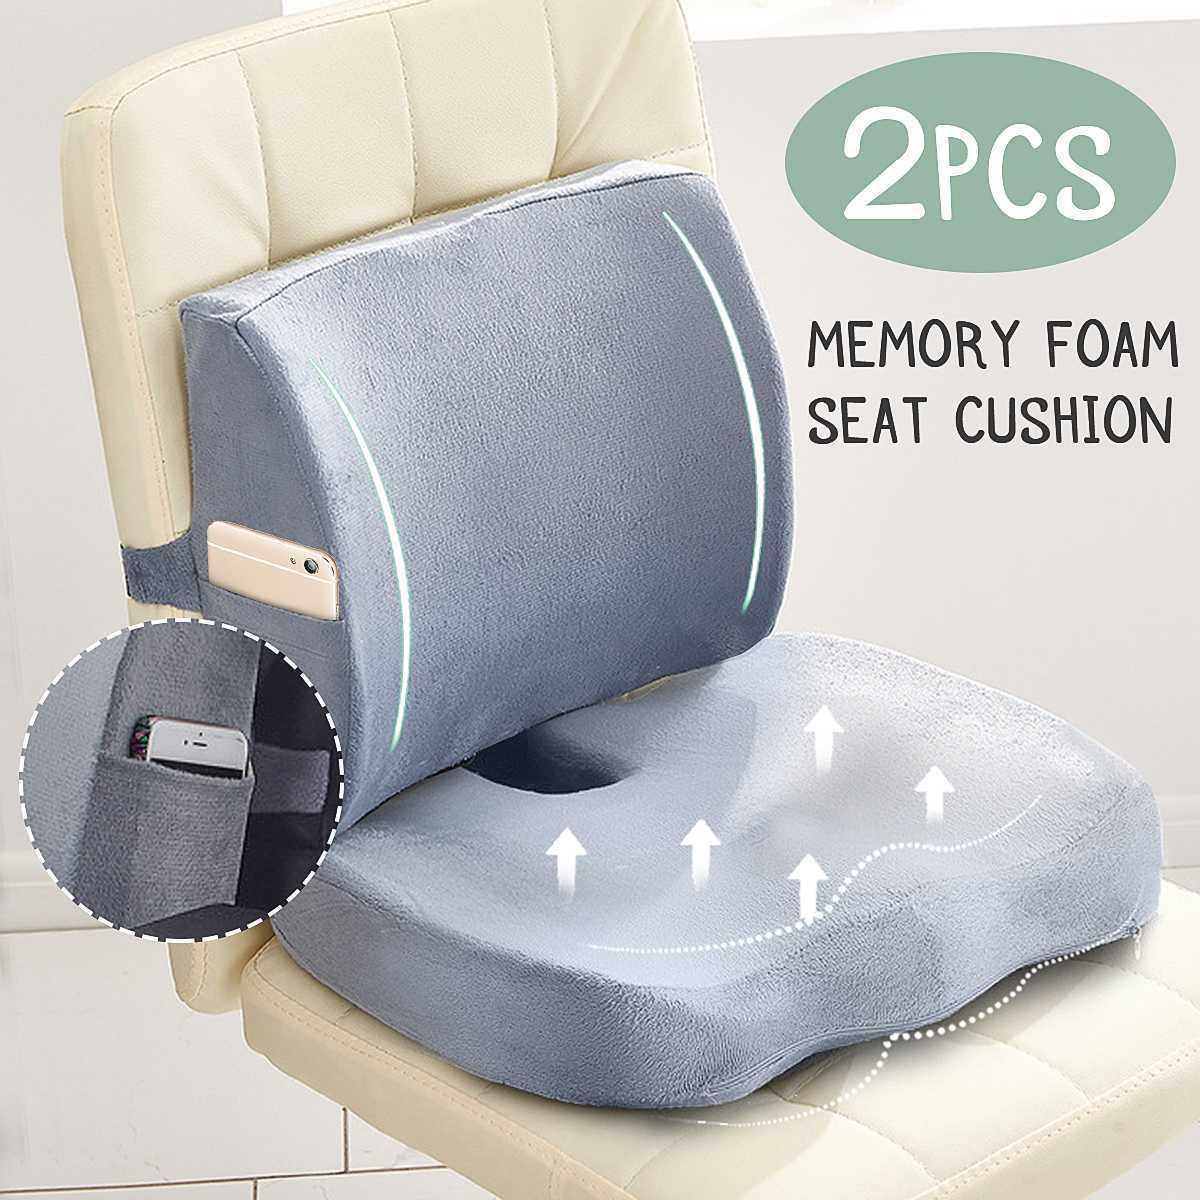 OrthoComfort Memory Foam Seat Cushion Ergonomic Chair Pillow For Back Pain  Relief, Hip Support, Coccyx Comfort Car/Office/Travel Cushion Set. From  Cong09, $24.26